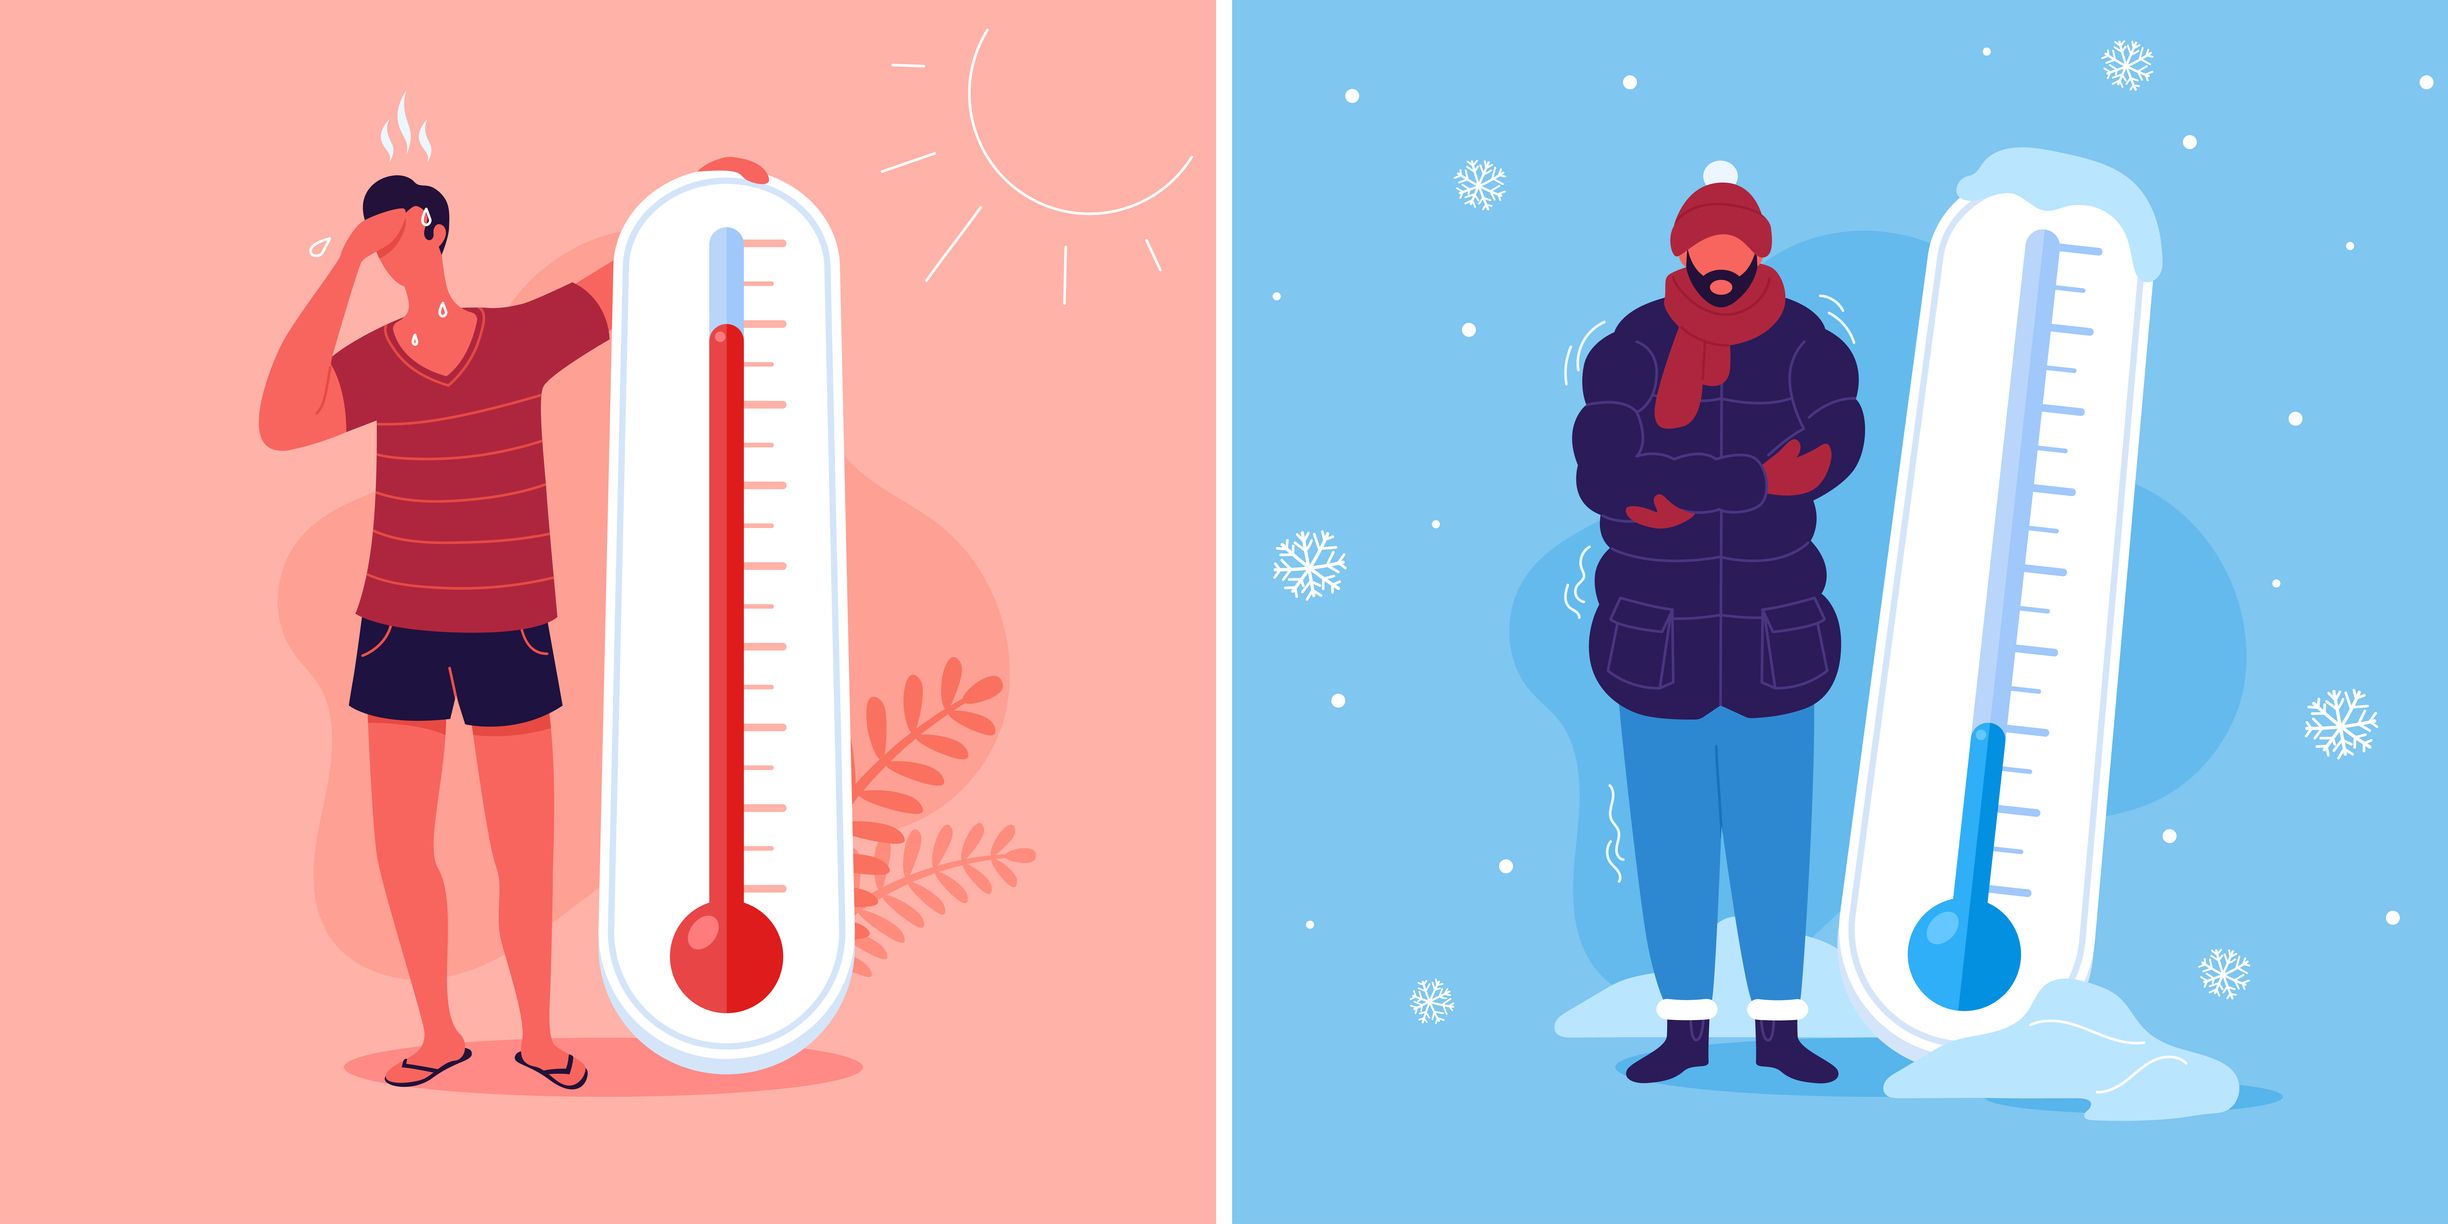 You should visit your doctor if you have any kind of skin reaction to either the hot or cold. GETTY